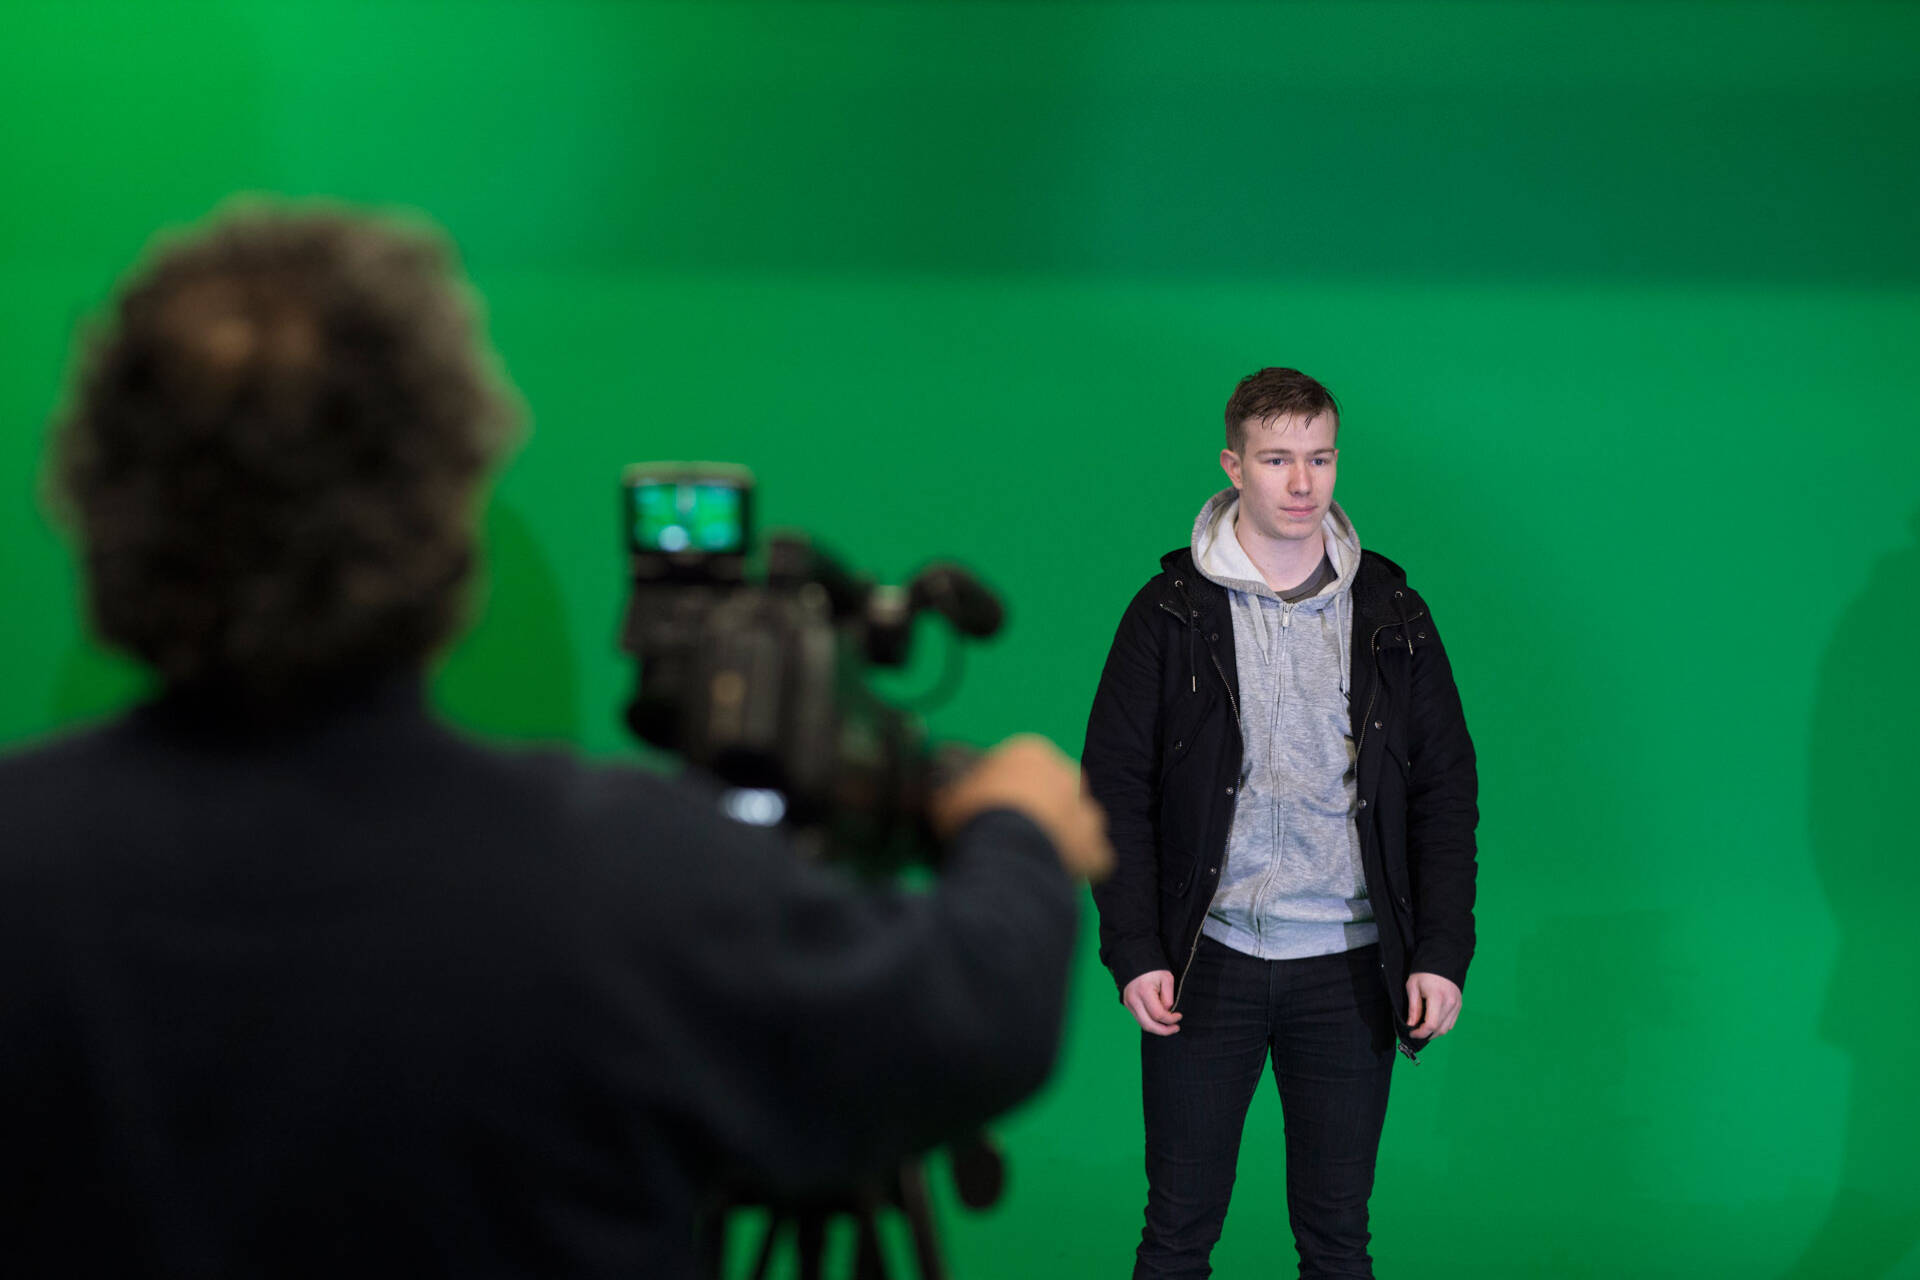 Filming against the Green Screen in the Production Studio